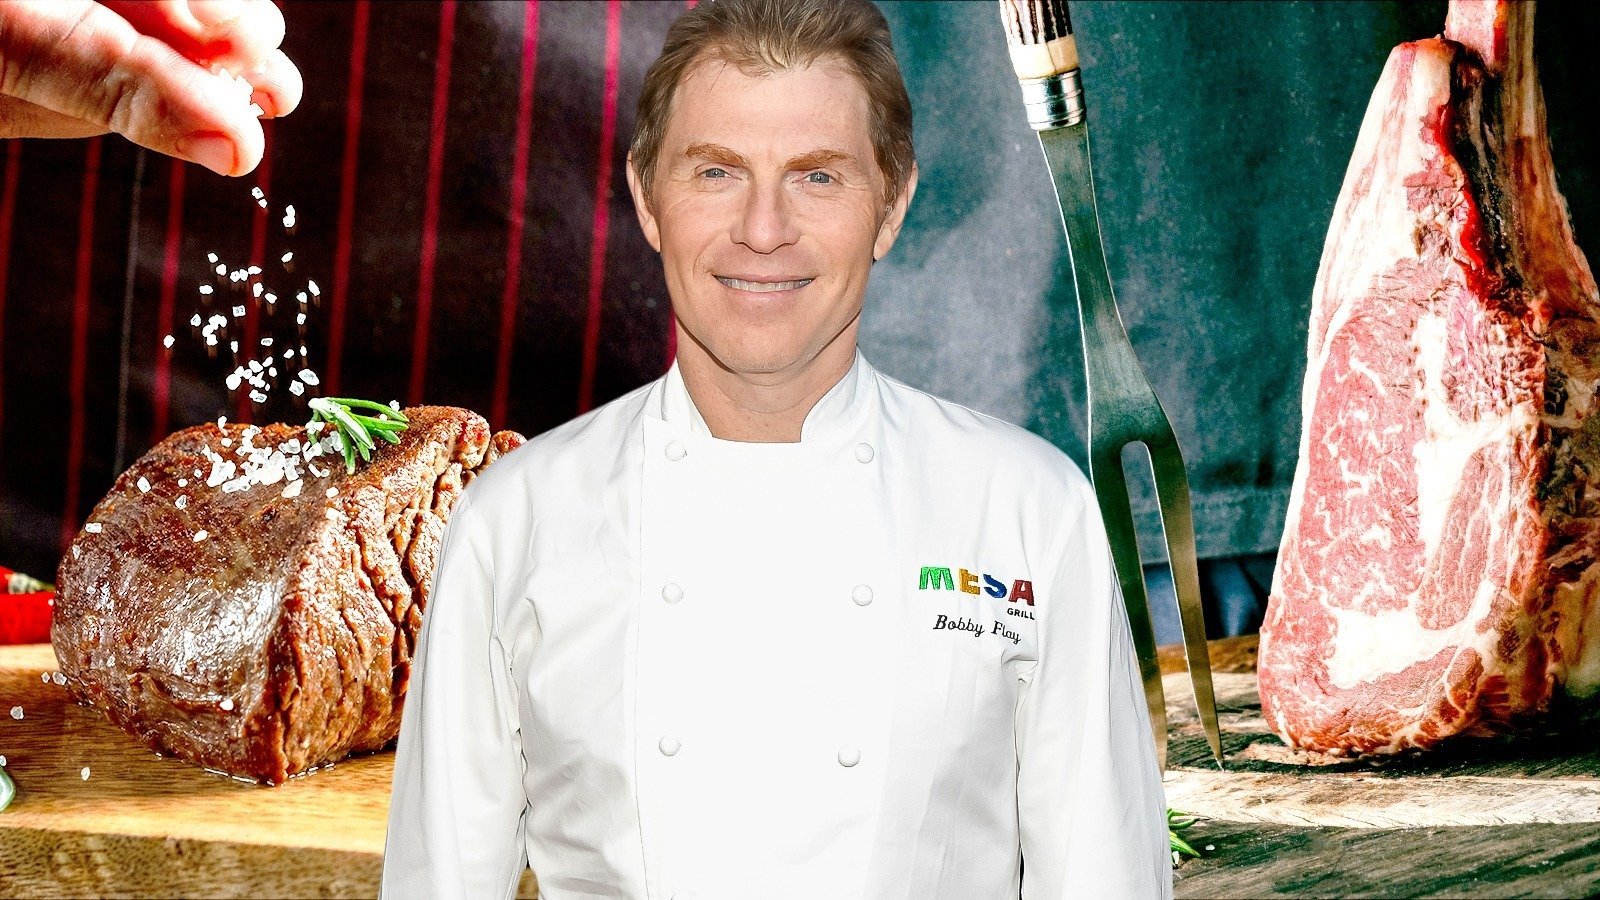 Bobby Flay's 14 Tips For Cooking The Perfect Steak